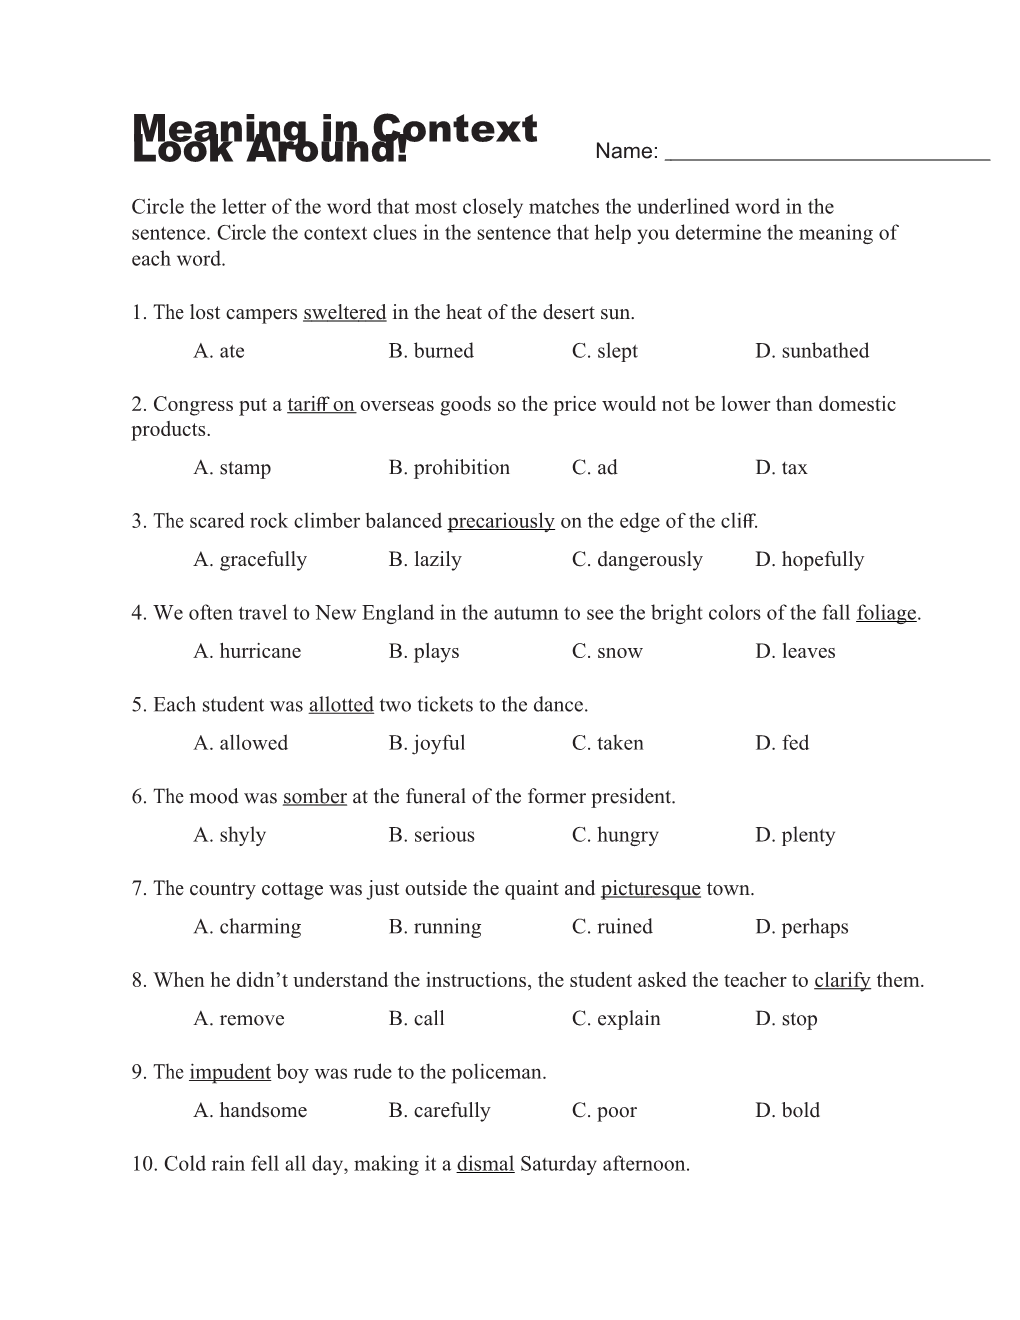 Look Around! Meaning in Context Middle School Worksheets